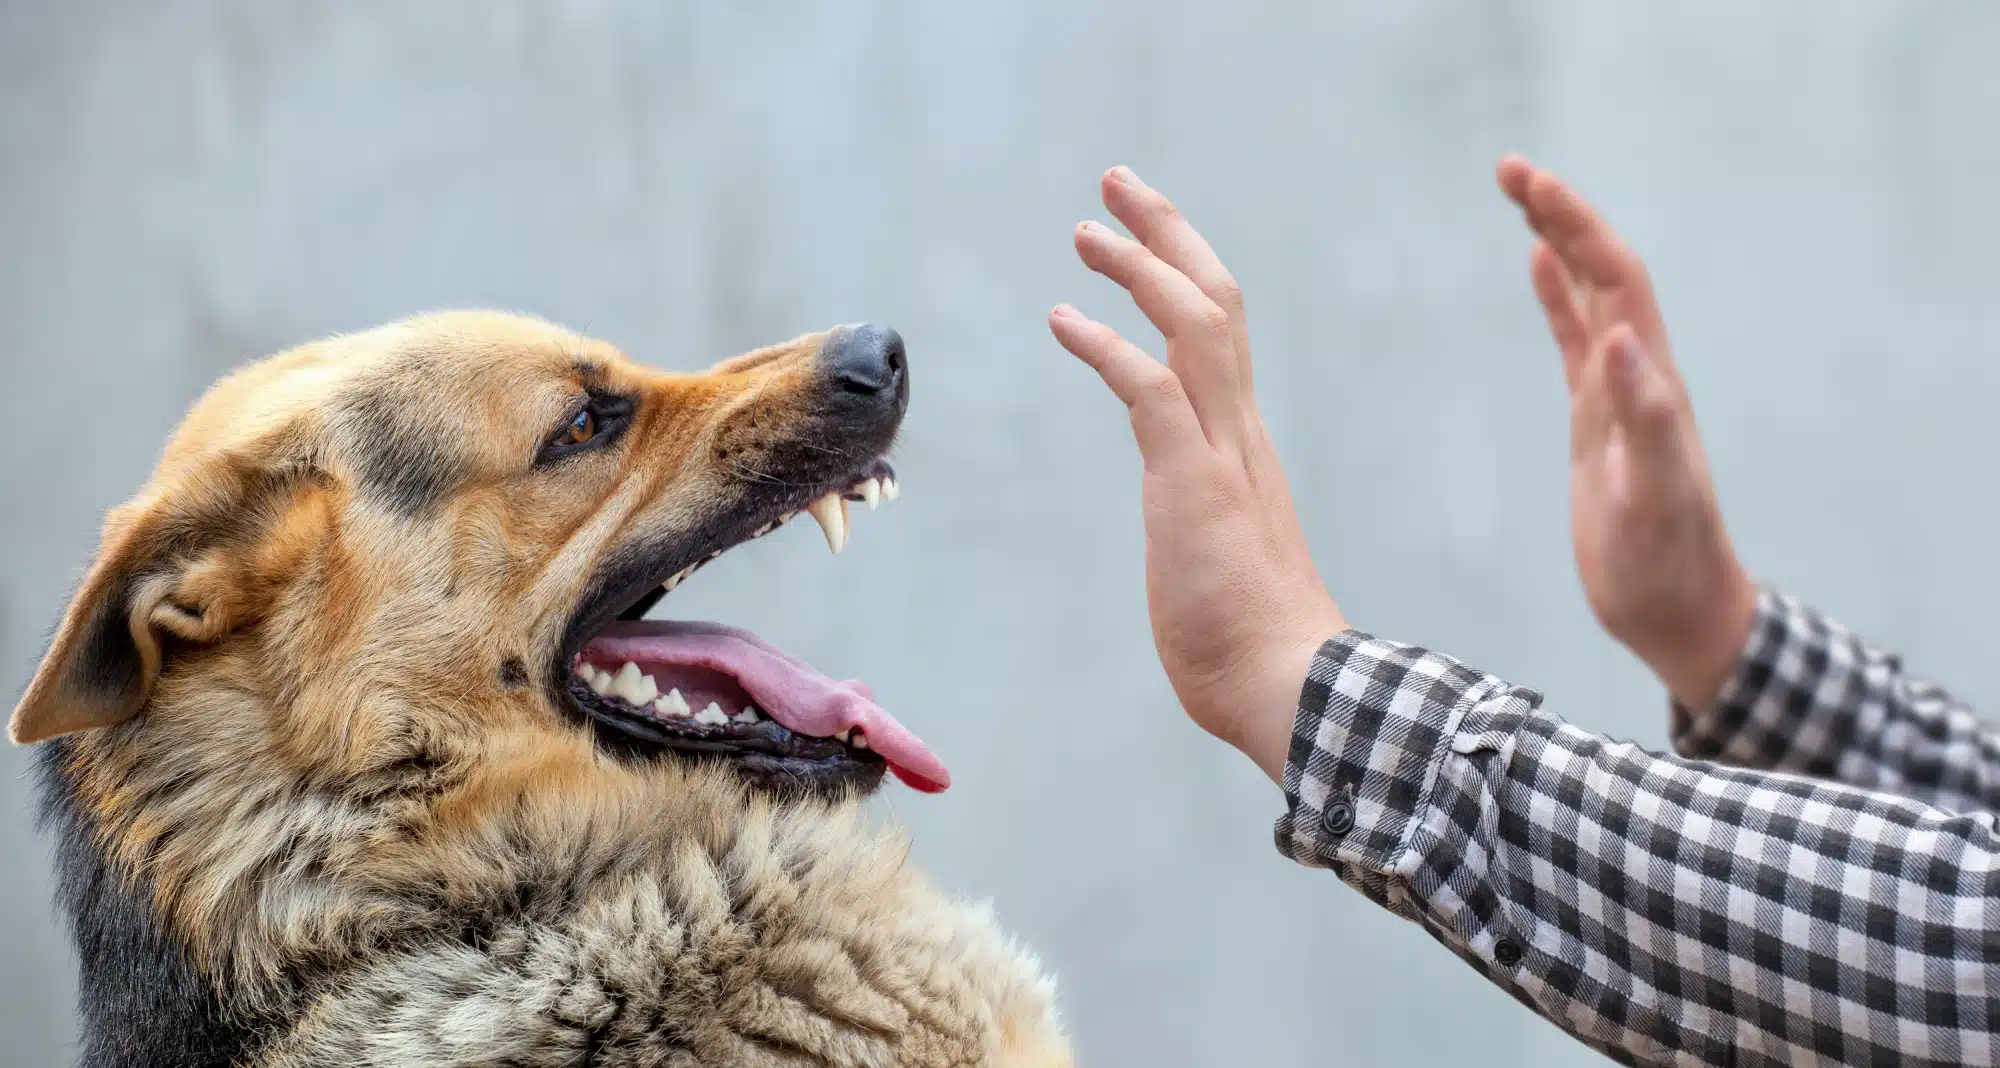 German Shepherd growls and threatens to bite man with his hands raised.